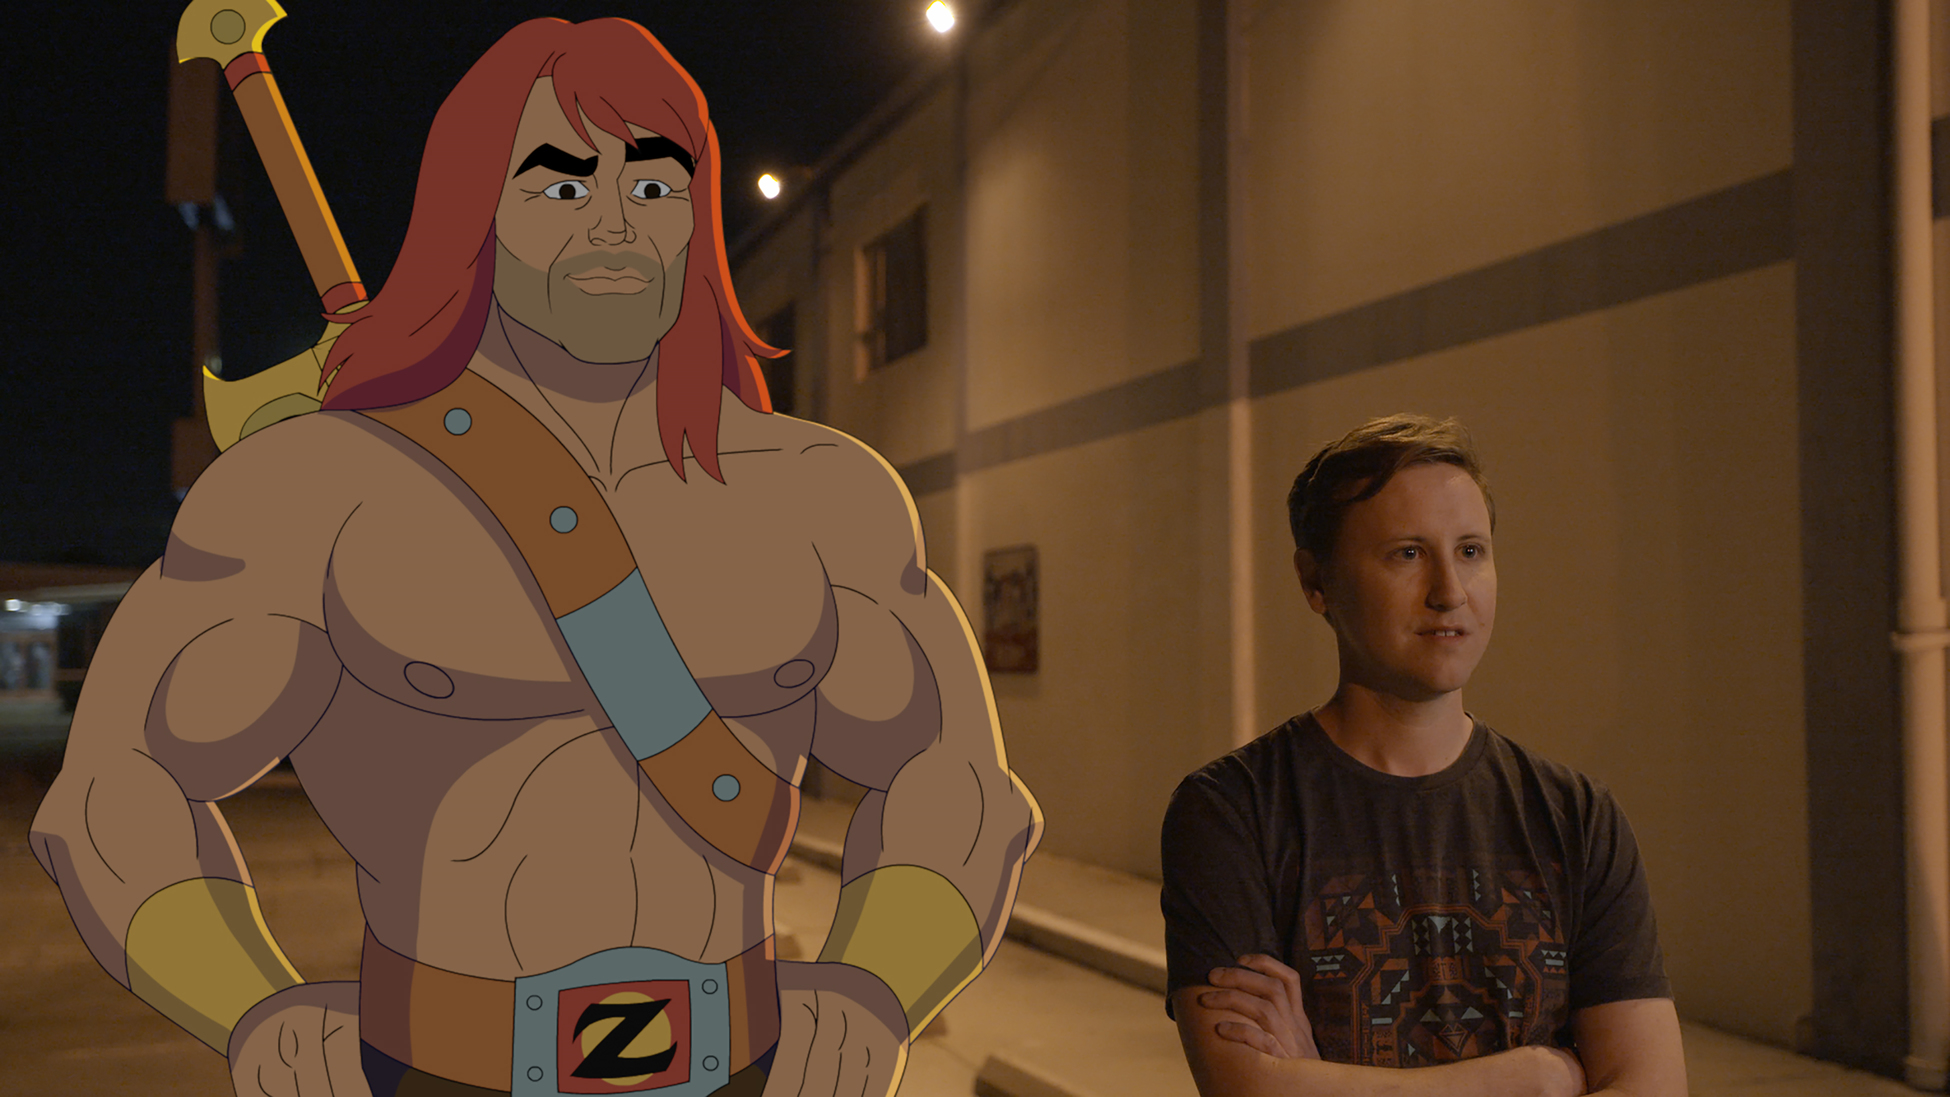 'Son of Zorn' S1 E4 "The Weekend Warrior" Synopsis